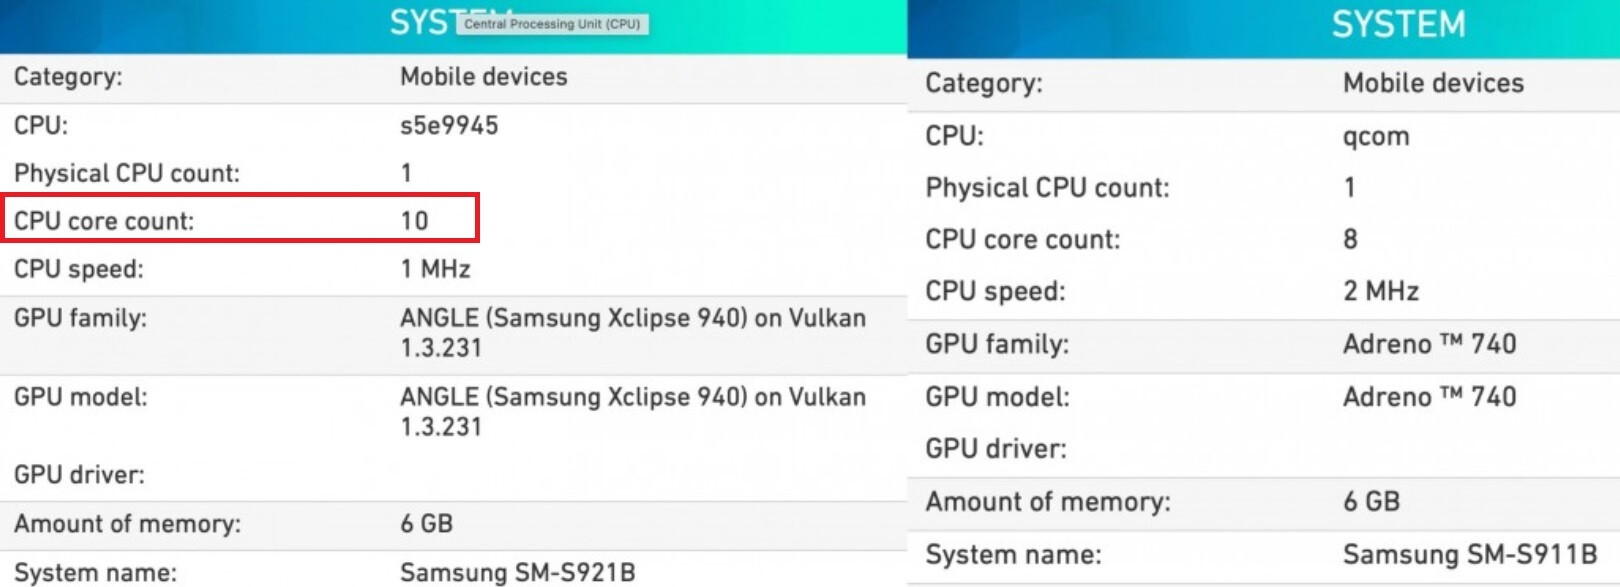 Powerboard 4.0 test shows a deca-core configuration for the Exynos 2400 chipset - Benchmark test corroborates previous rumors: Exynos 2400 is a deca-core chipset